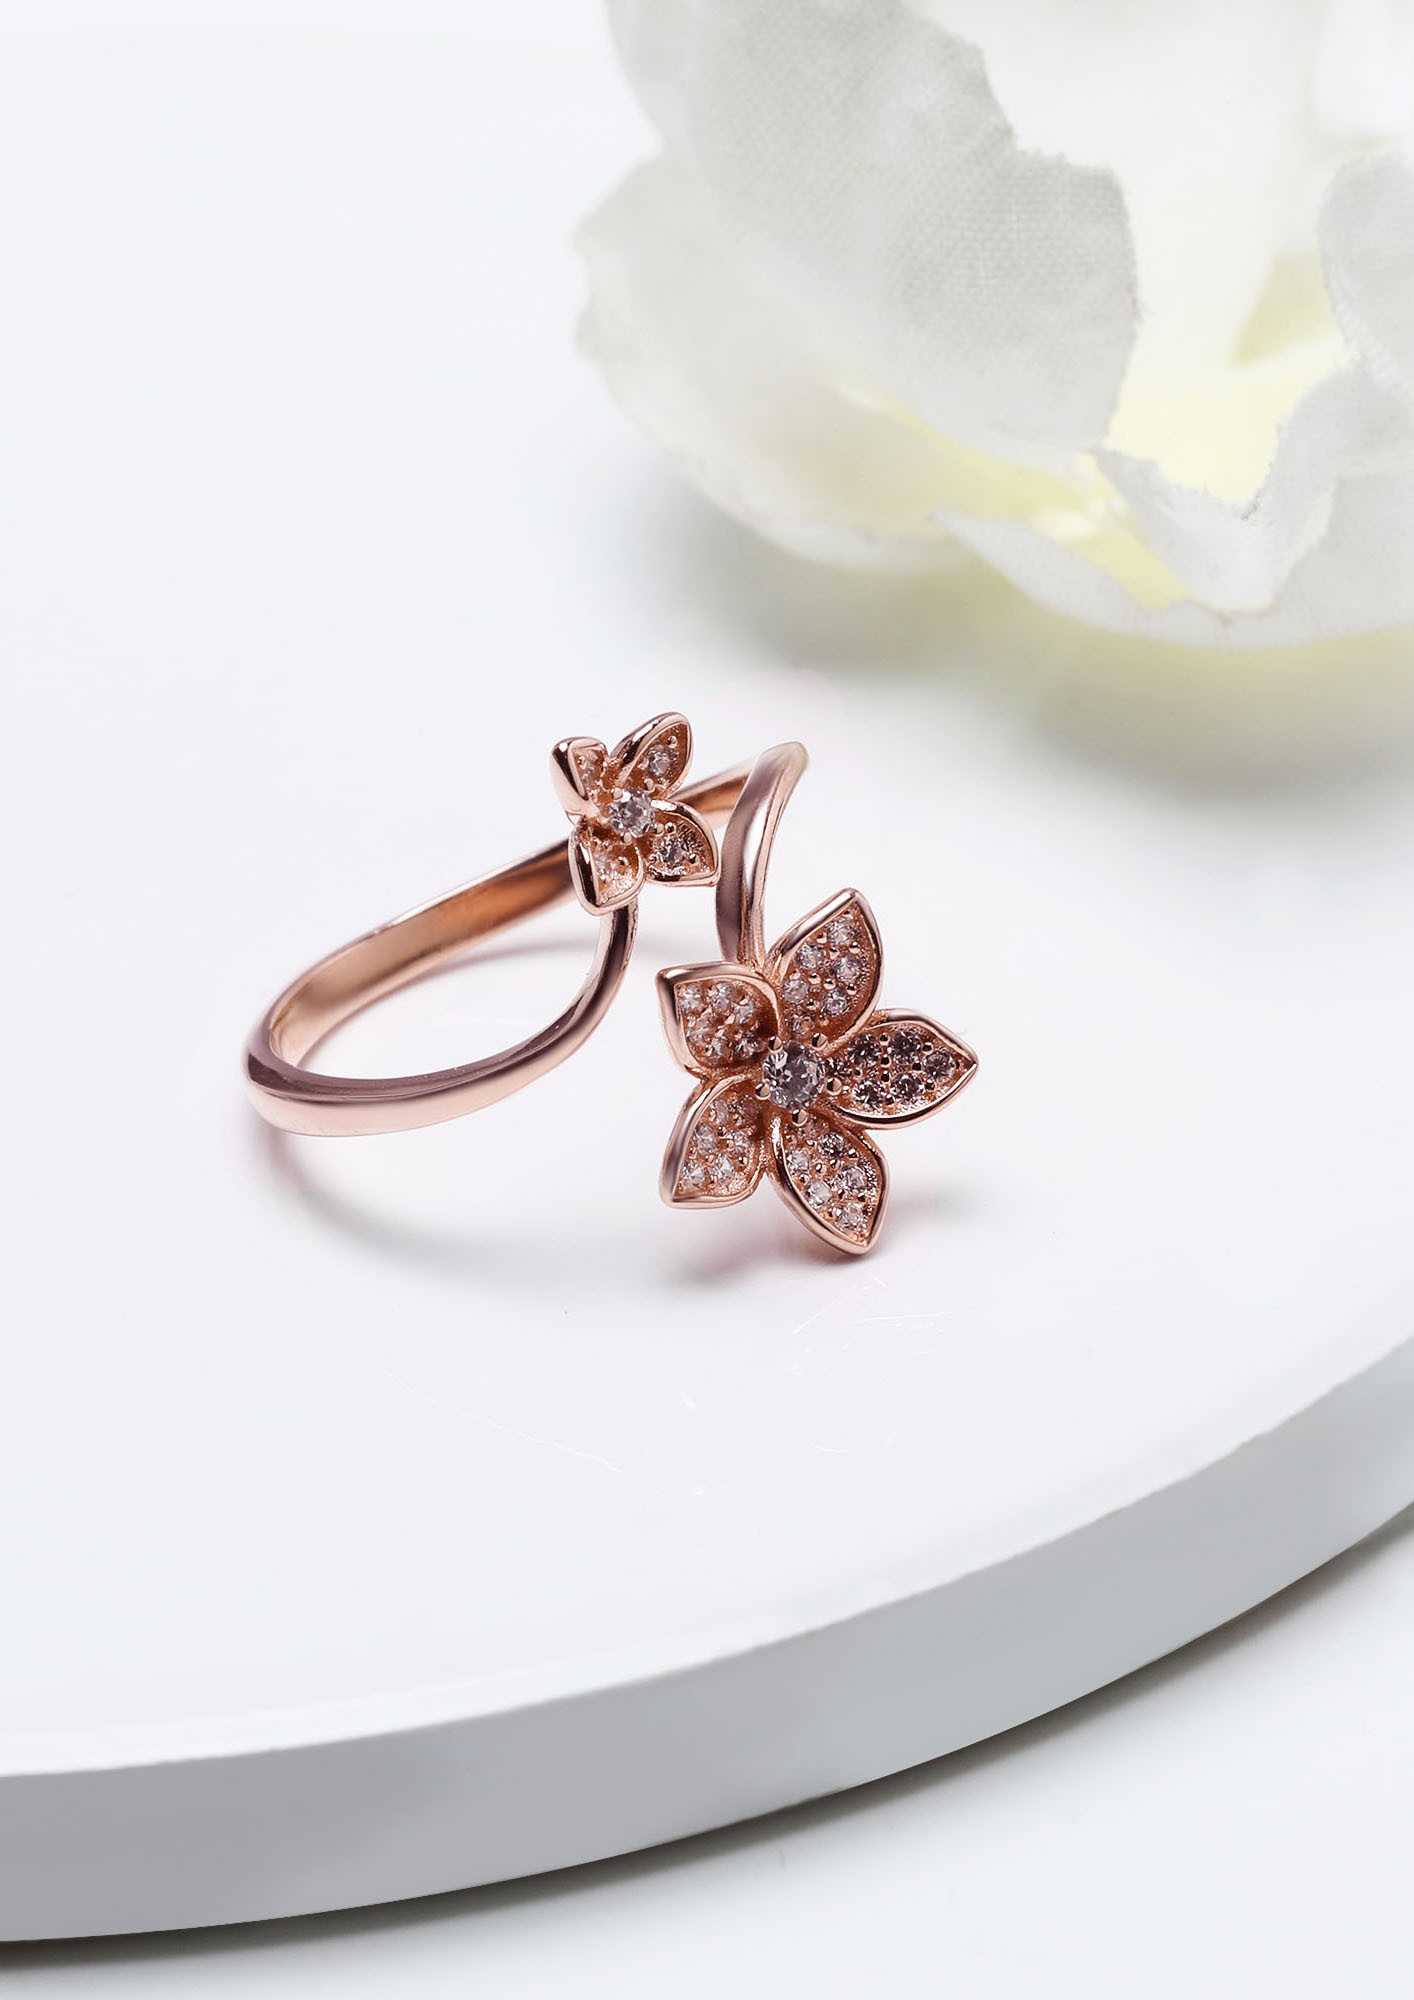 Flower Motif Rings: History, Meaning & Beautiful Examples – Raymond Lee  Jewelers